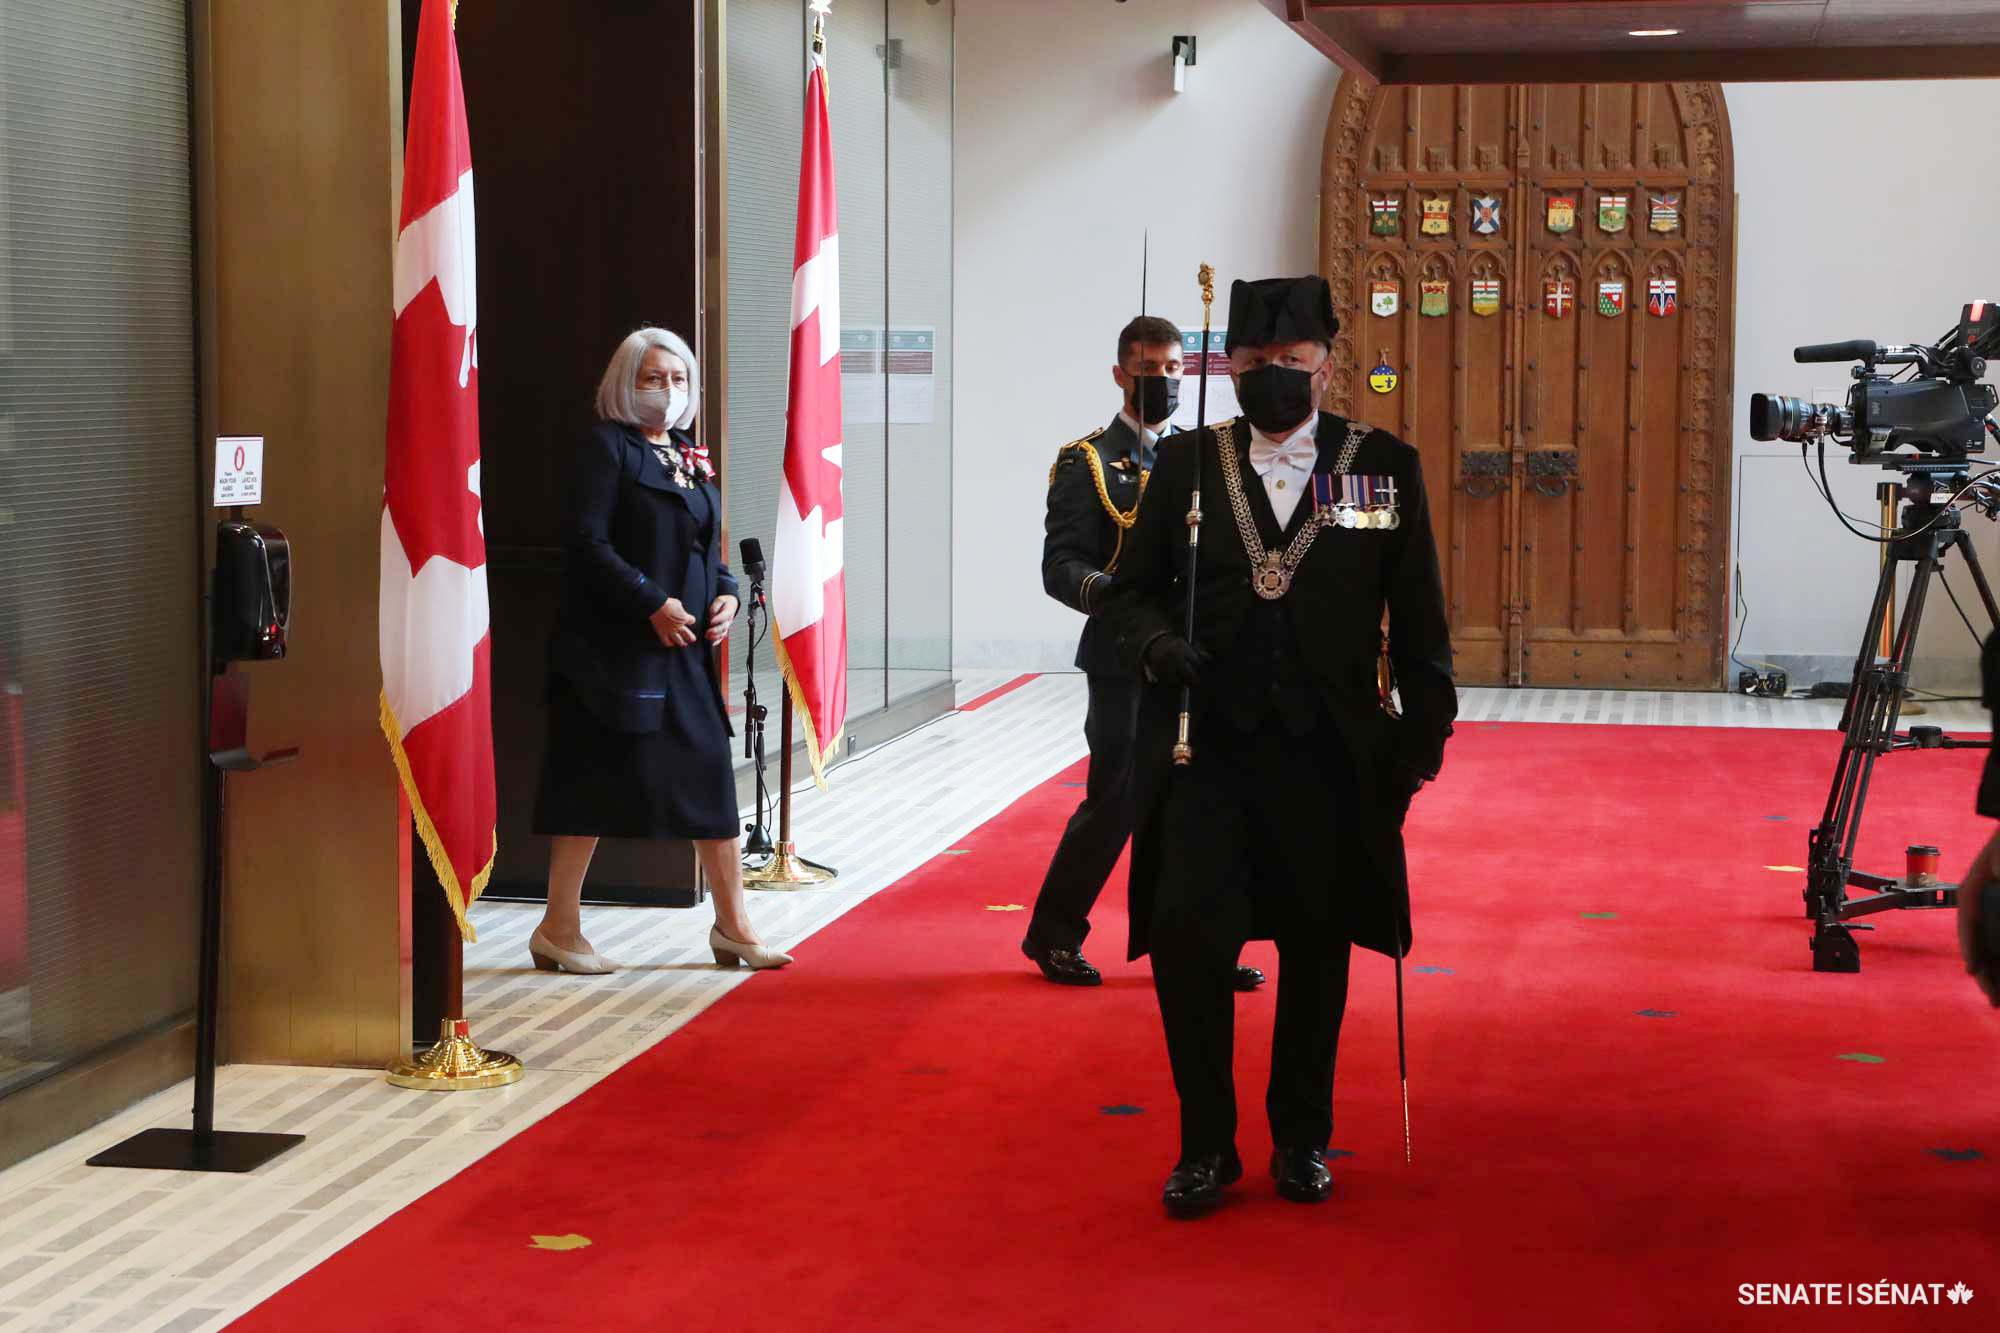 Governor General Mary Simon leaves the Senate led by the Usher of the Black Rod J. Greg Peters.